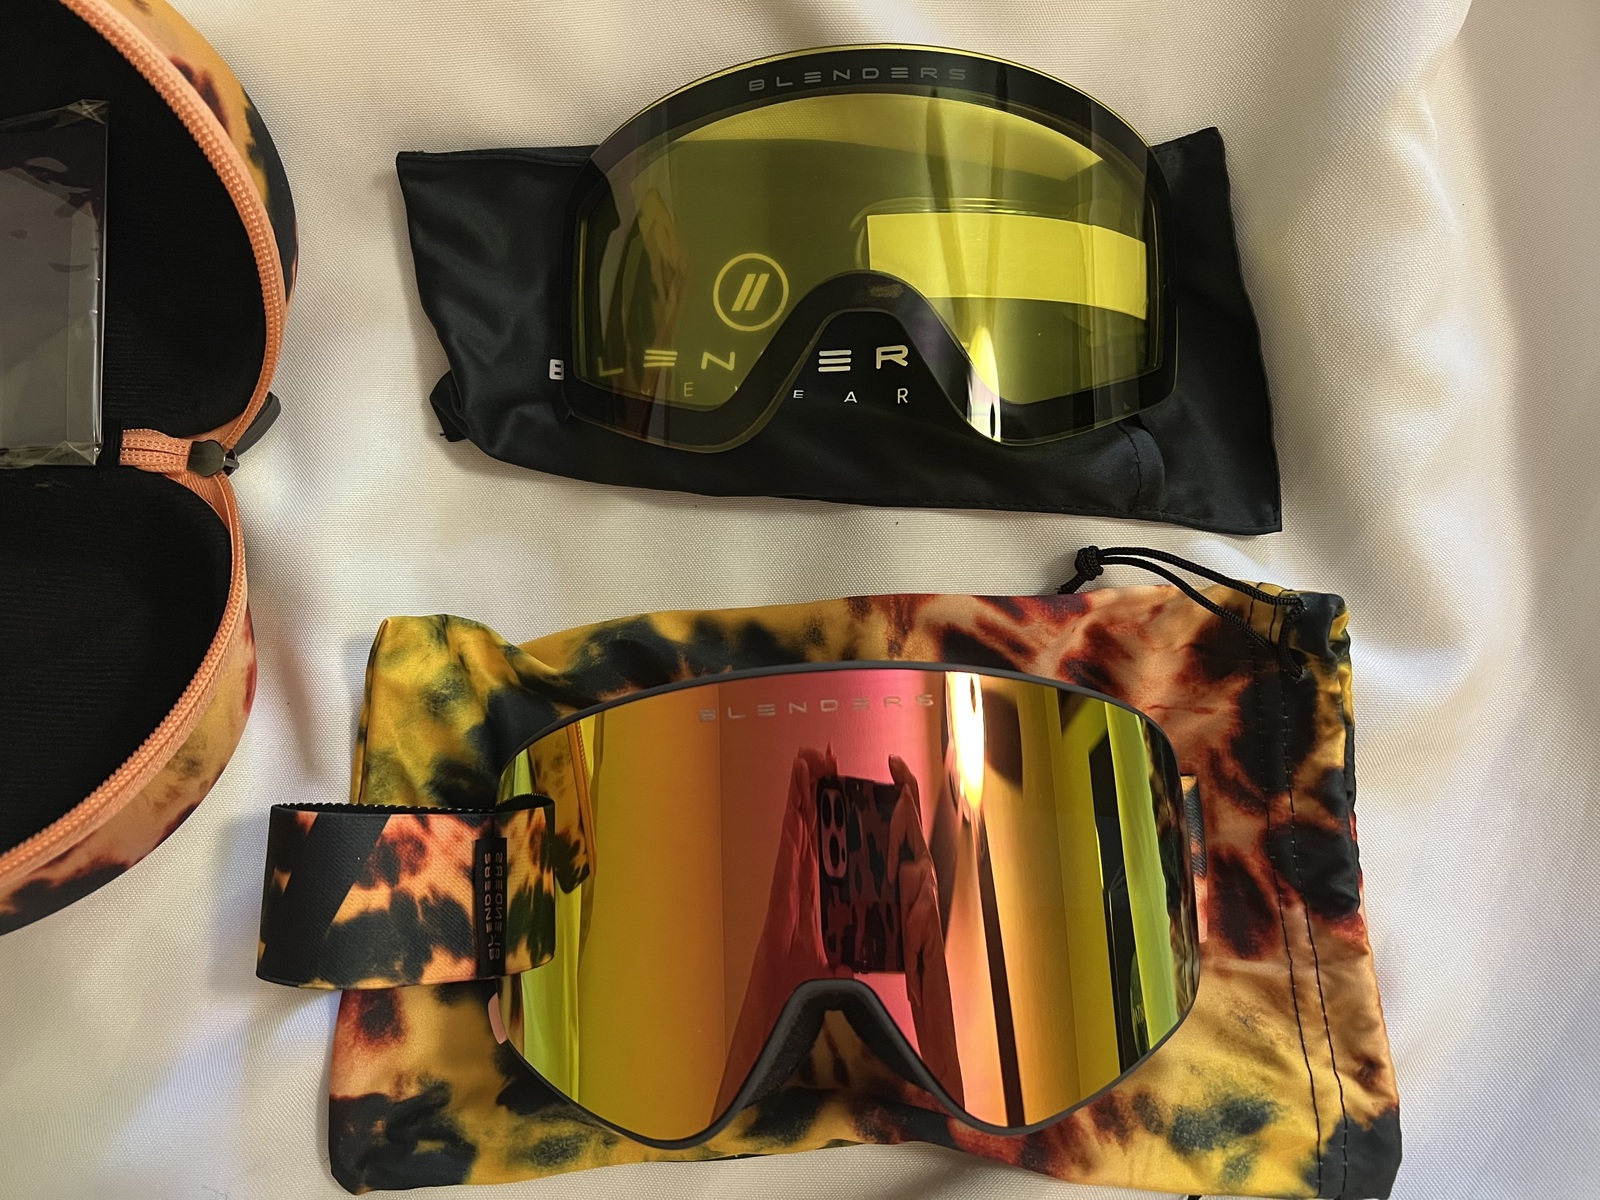 Blenders Flame Mingo | Aura Snow Goggles- and similar items